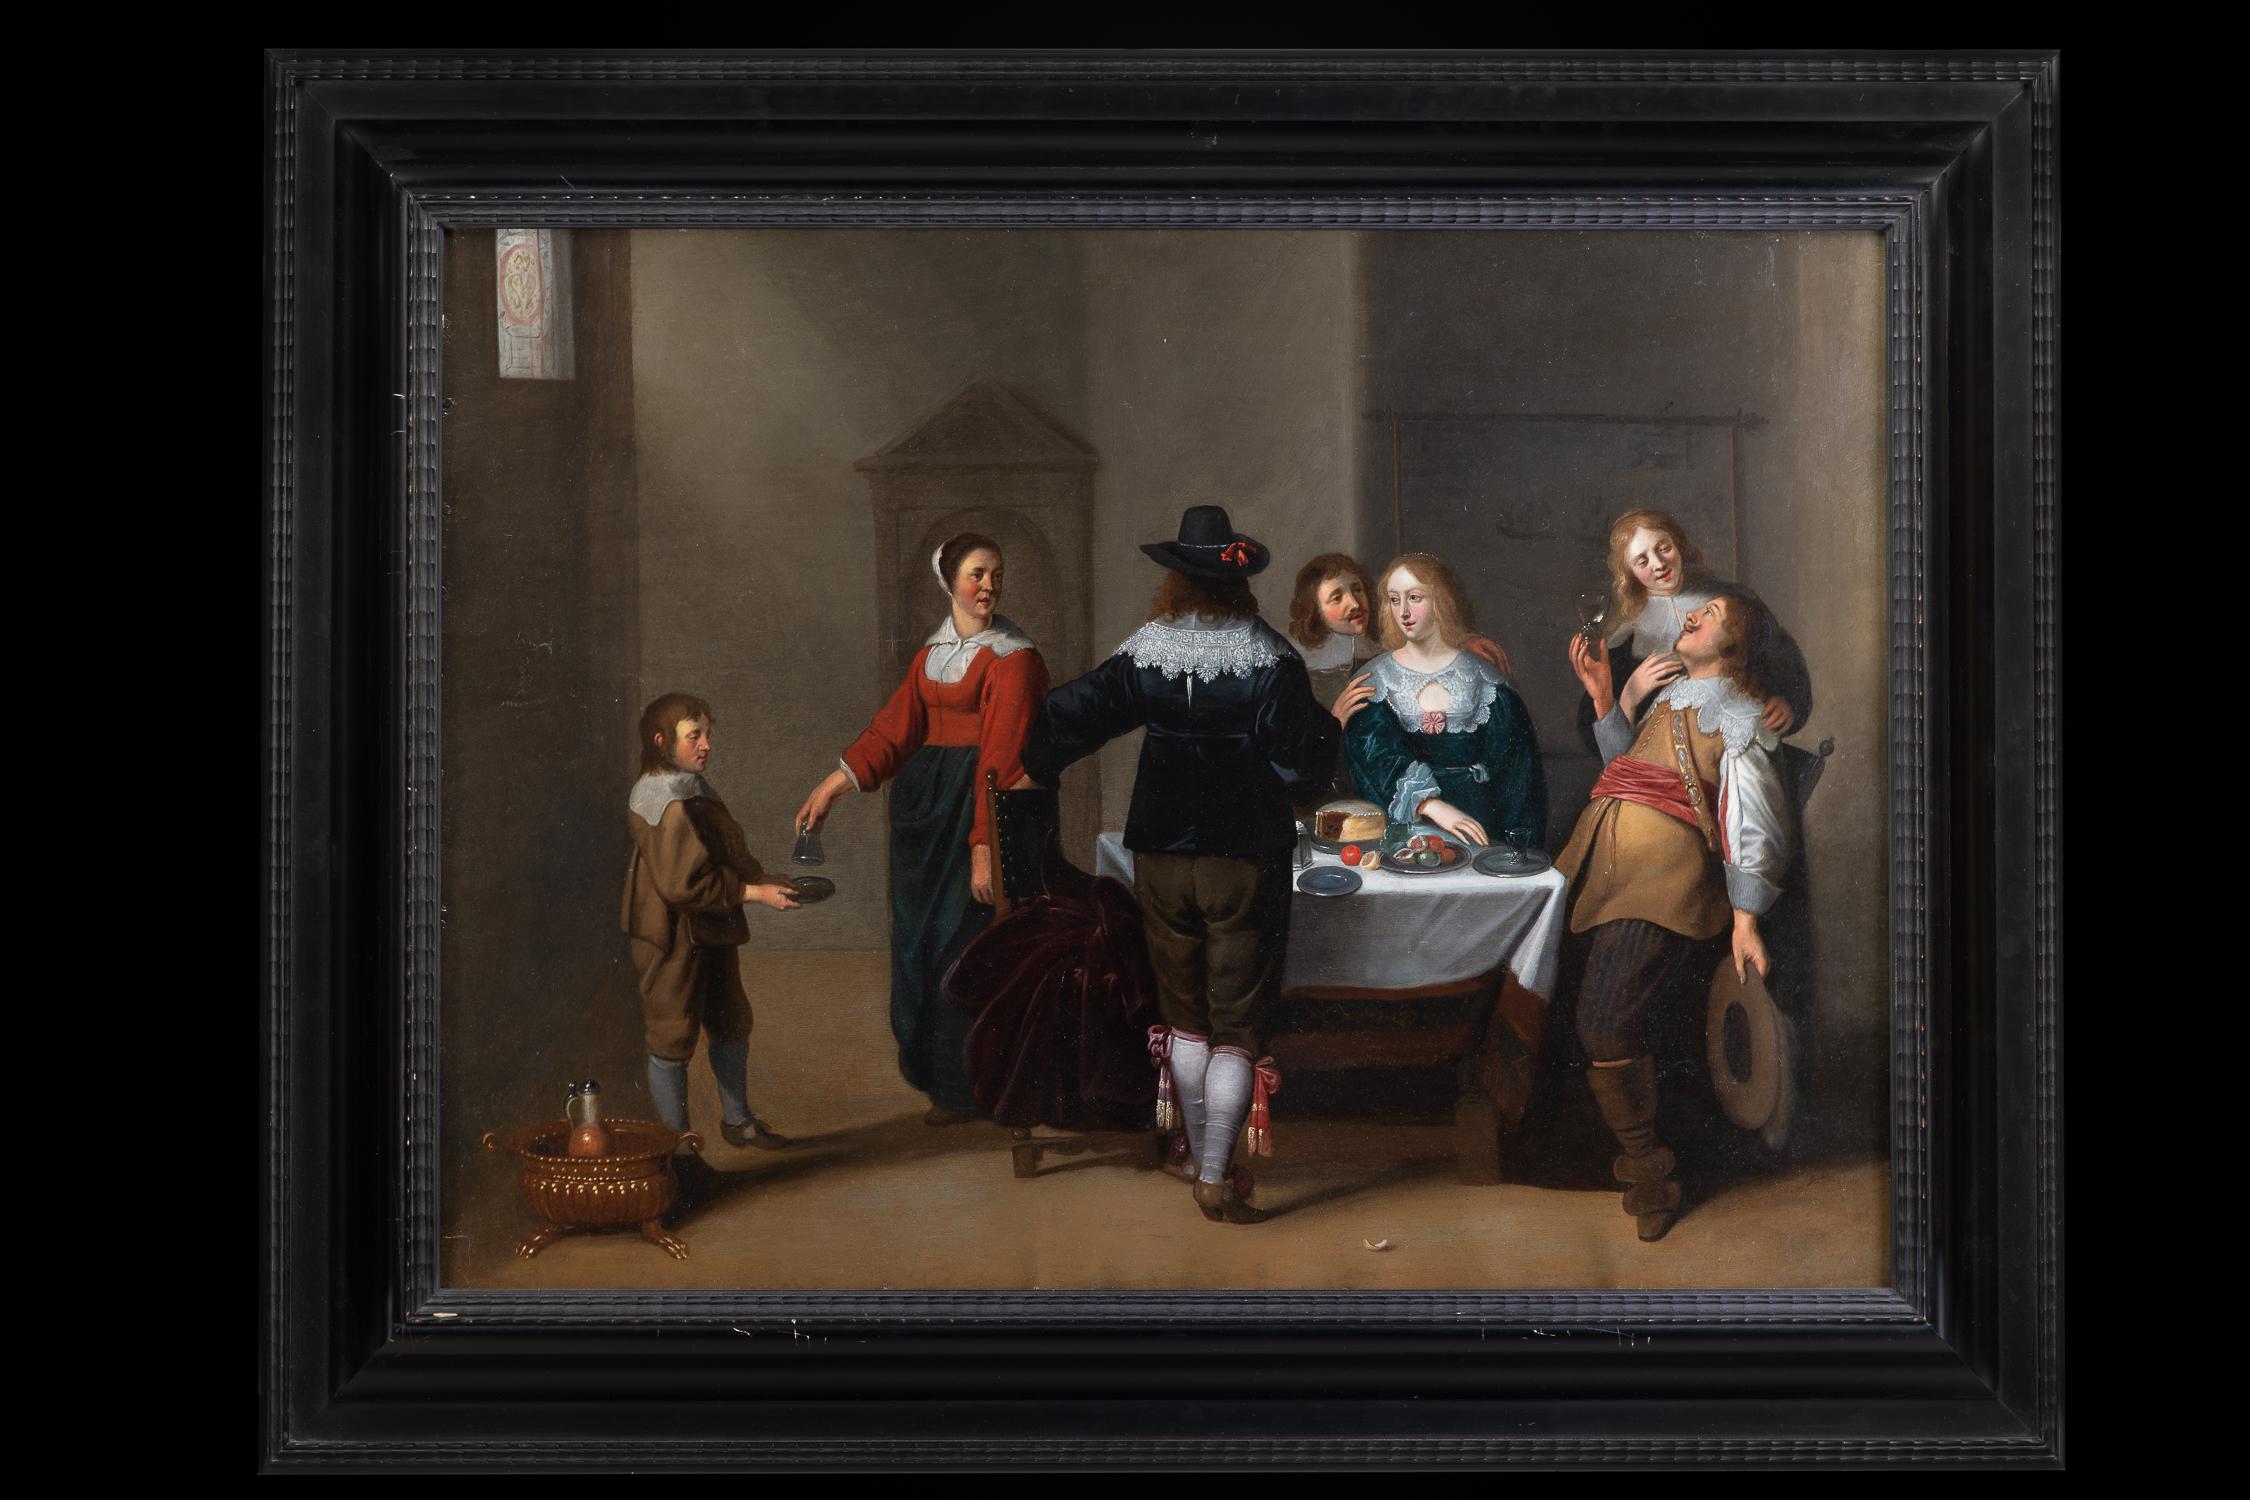 Merry Company in an Interior - Painting by Christoffel Jacobsz. van der Laemen